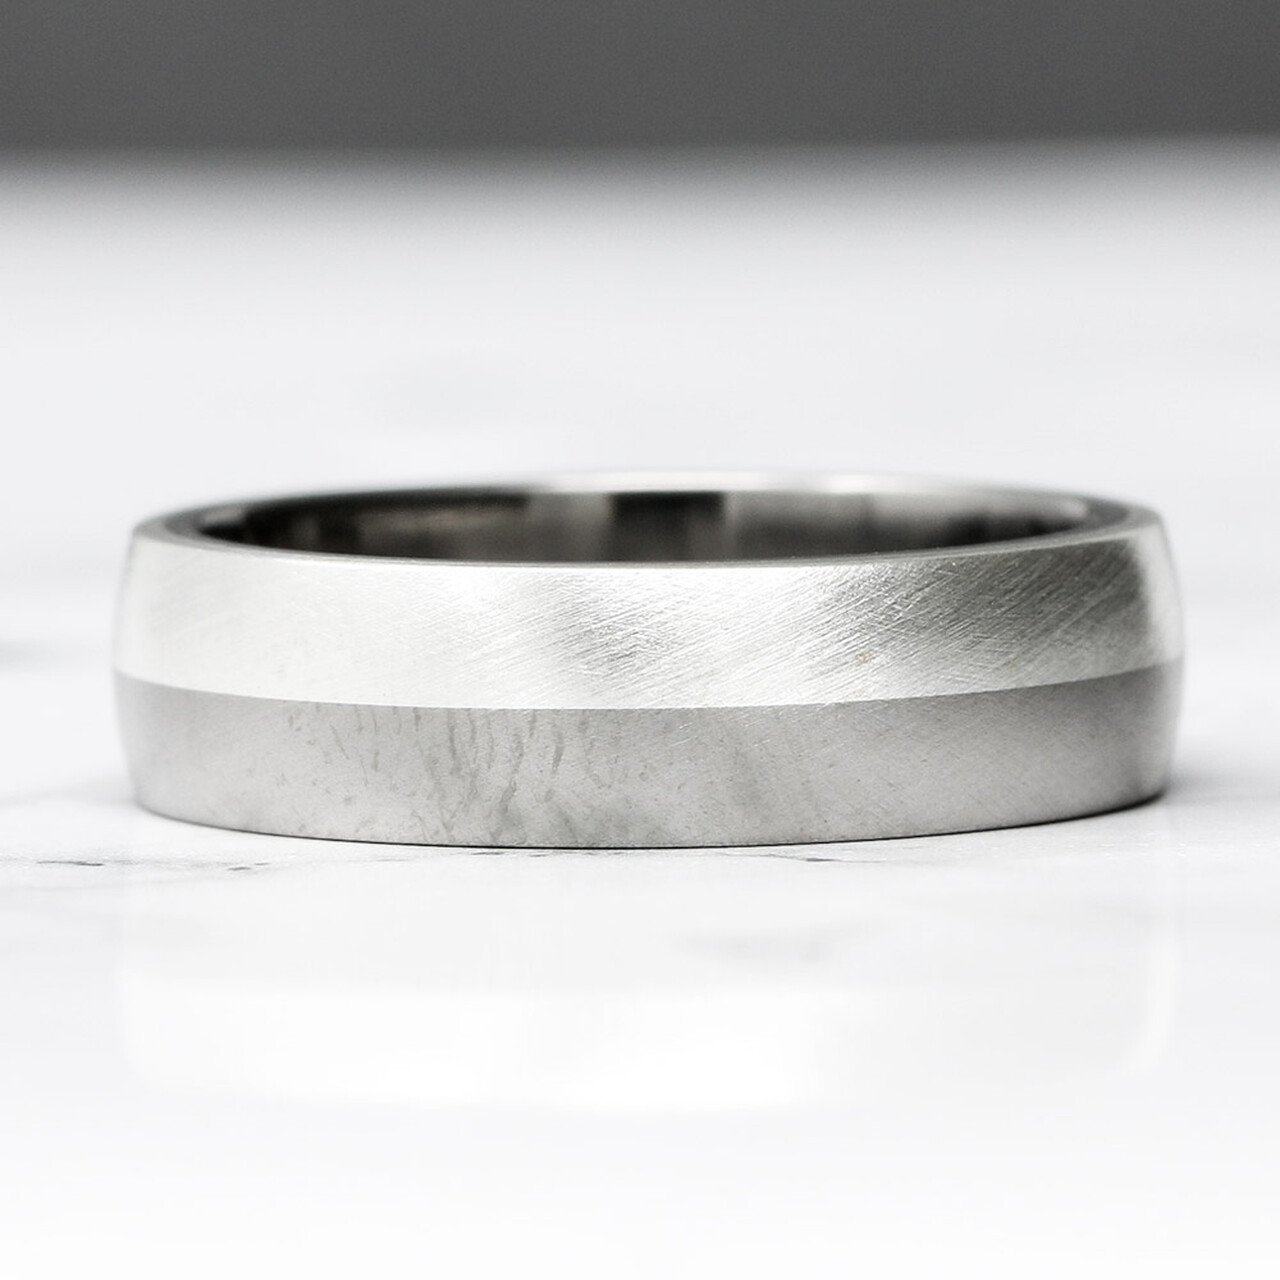 Horizon Silver and Titanium Ring - 6mm by Prism Design